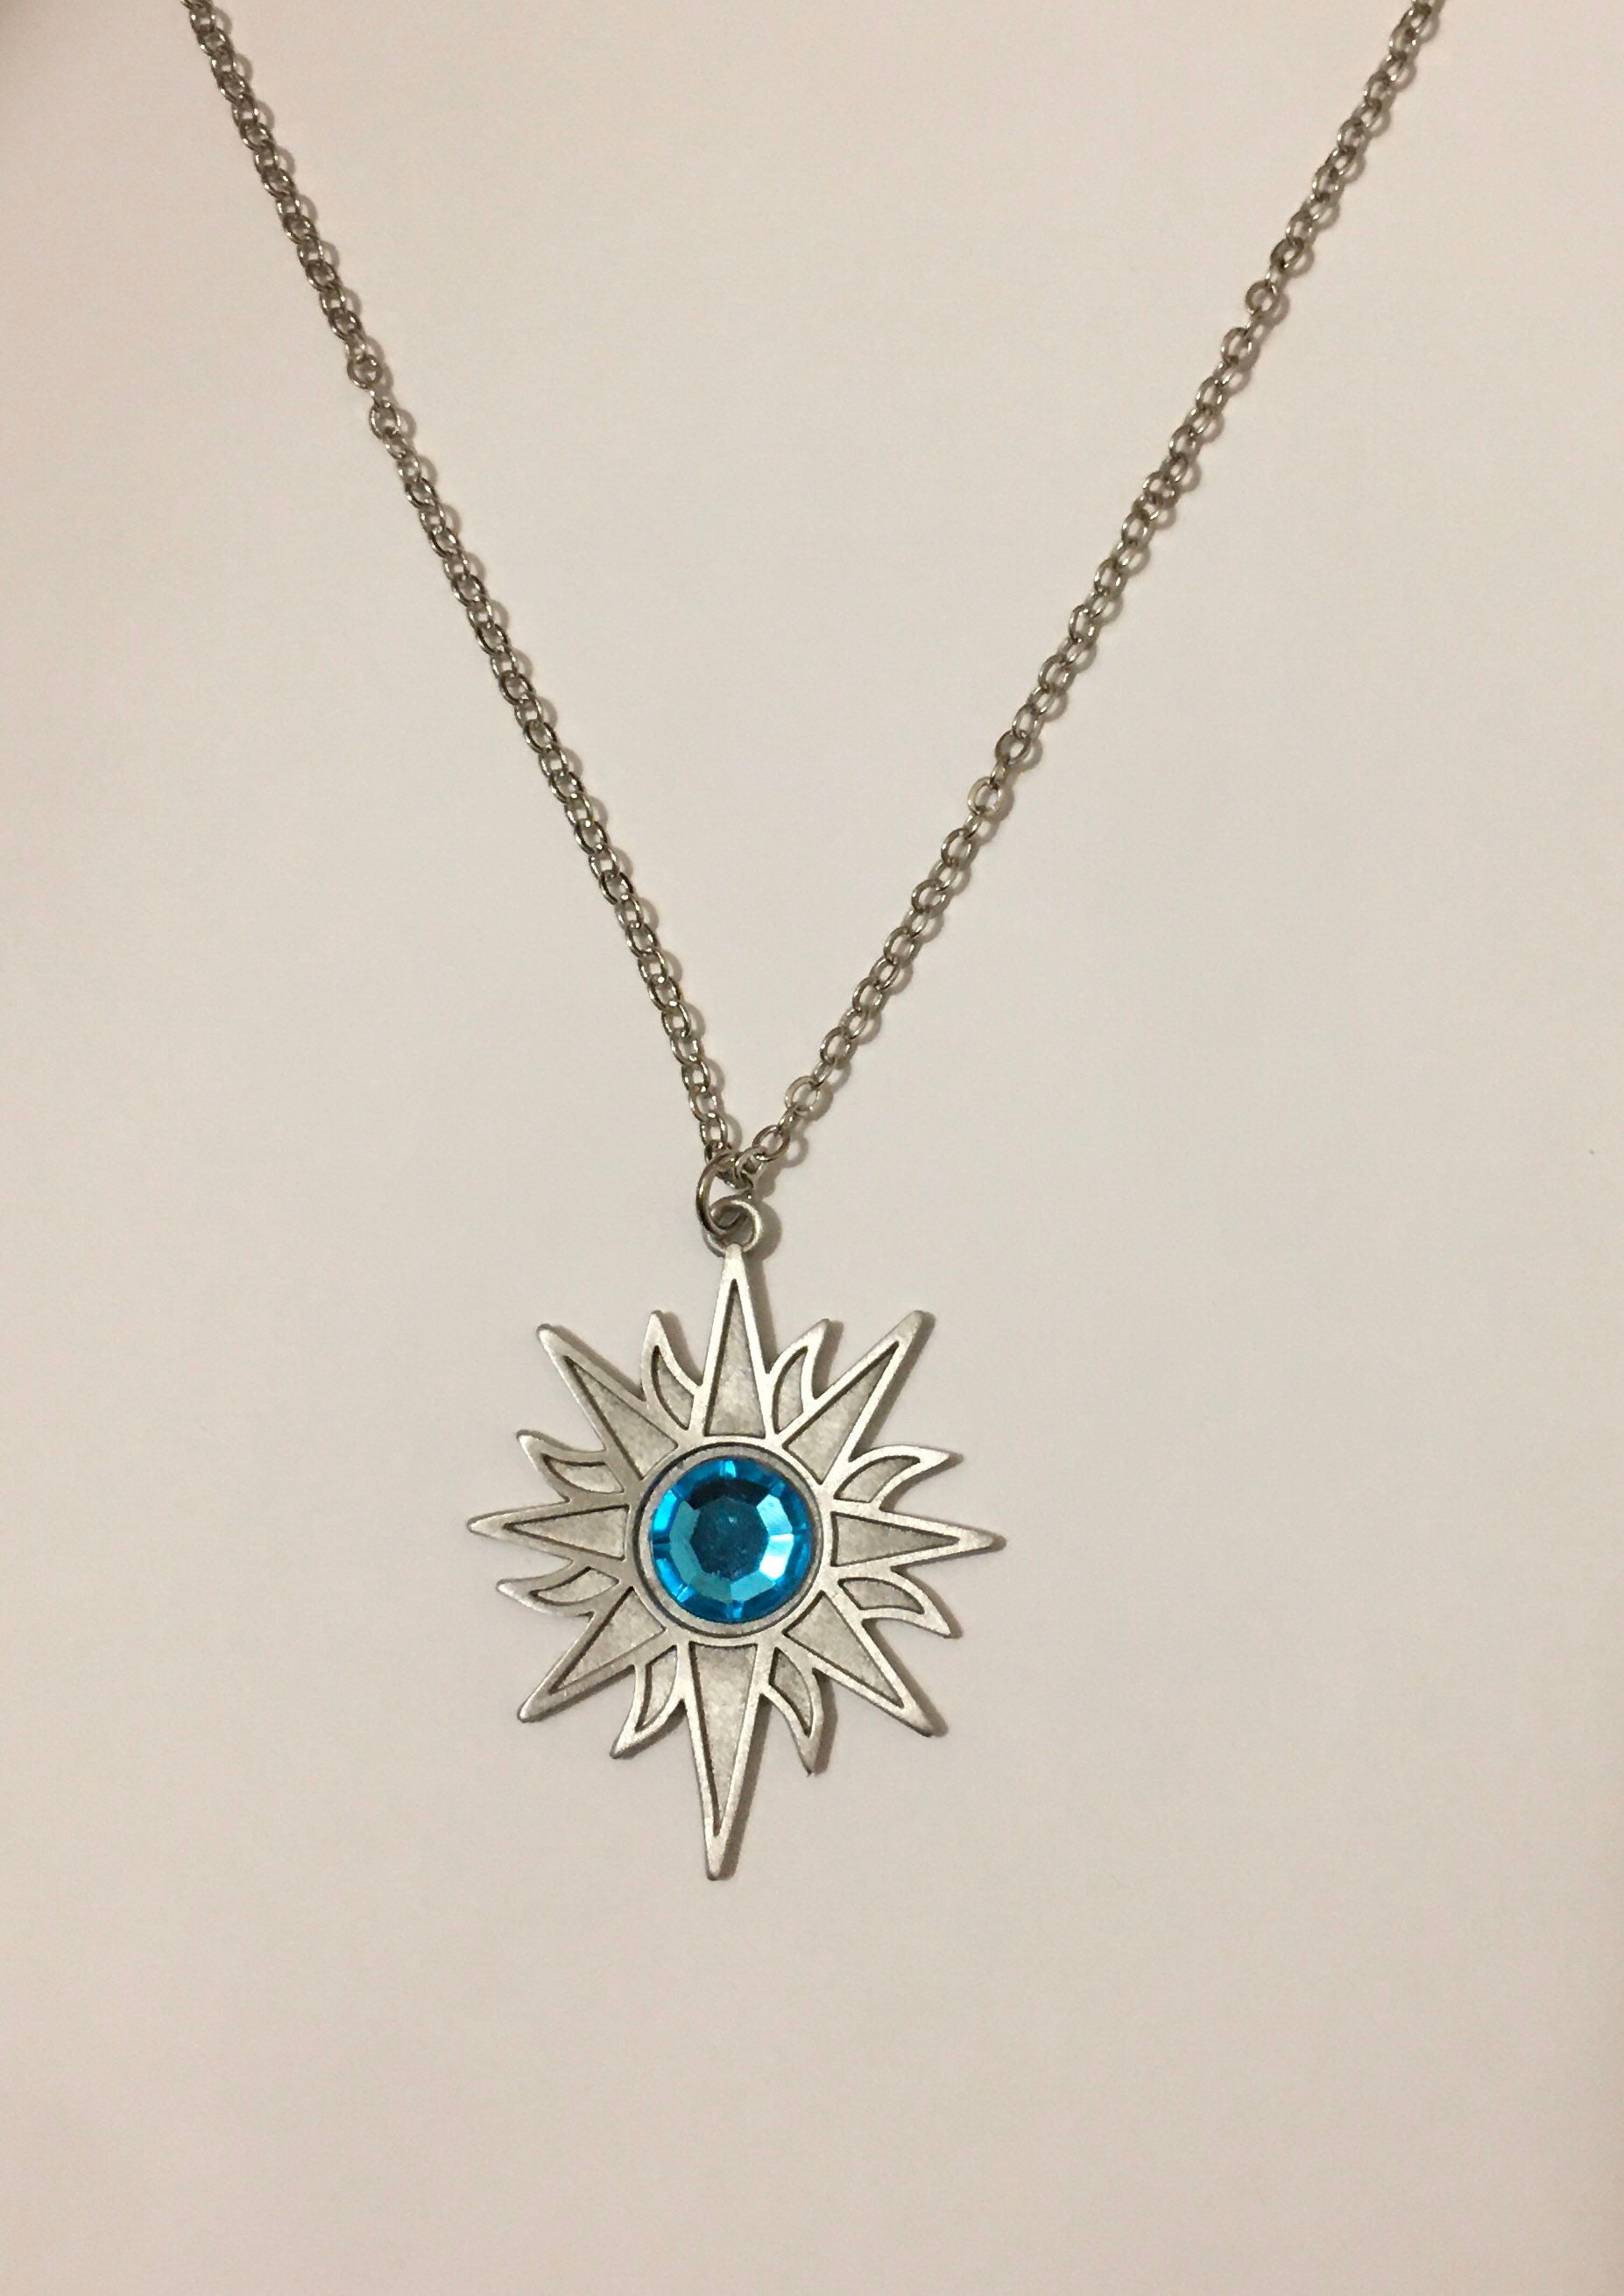 Limited Edition Bright Finish Twitches Sun Pendant From Etsy